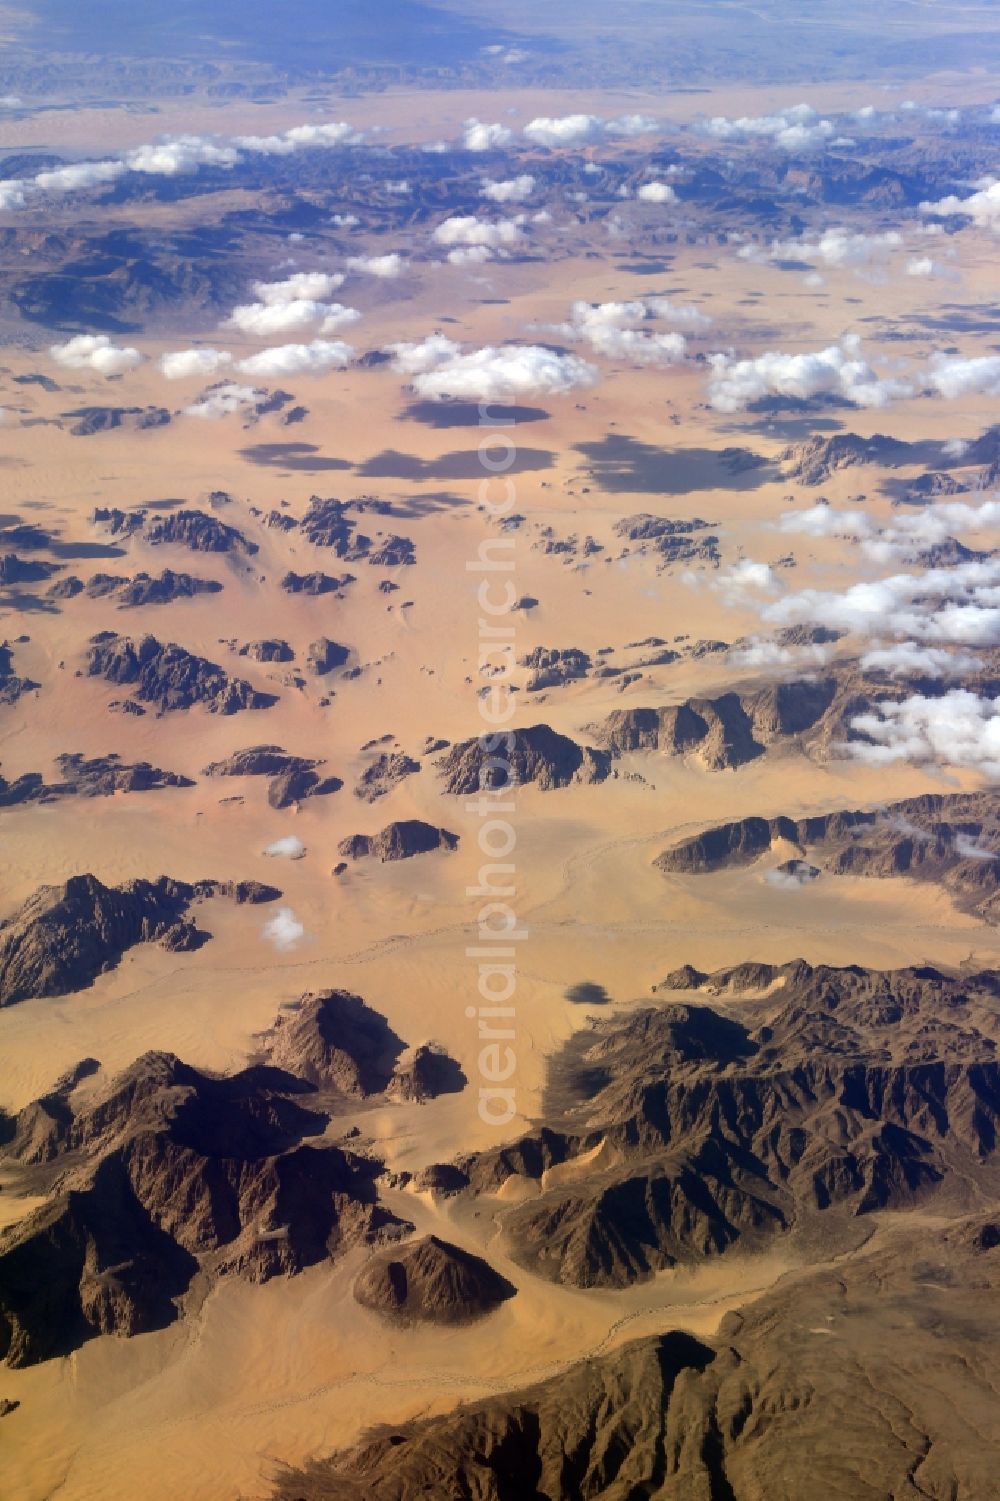 Aerial photograph At-Tuweisa - Sand, desert, dunes and rocky landscape in the Arab Desert at At-Tuweisa in Aqaba Governorate, Jordan